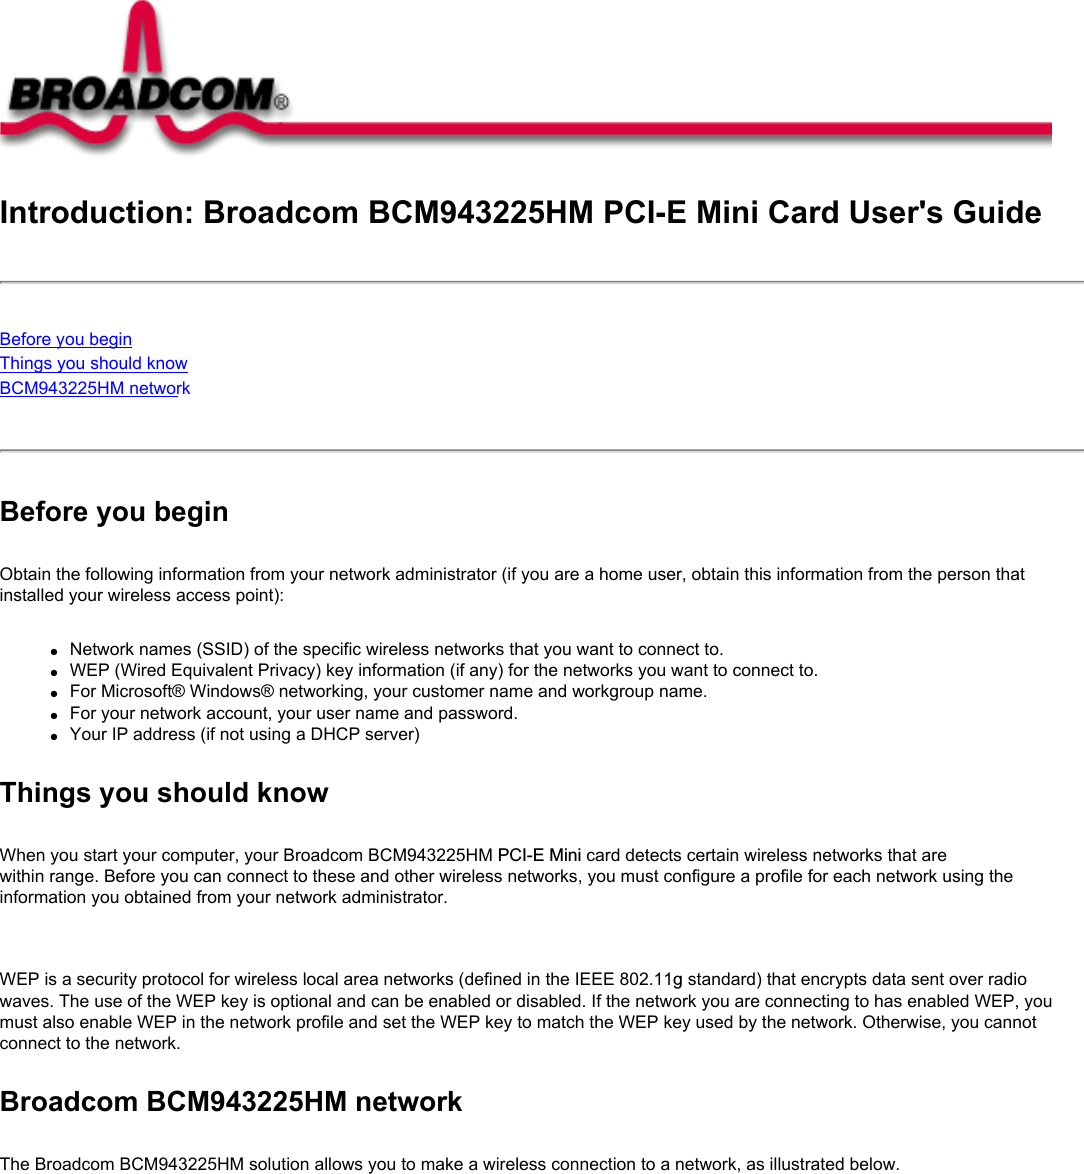 Introduction: Broadcom BCM943225HM PCI-E Mini Card User&apos;s GuideBefore you beginThings you should knowBCM943225HM network Before you beginObtain the following information from your network administrator (if you are a home user, obtain this information from the person that installed your wireless access point):●     Network names (SSID) of the specific wireless networks that you want to connect to.●     WEP (Wired Equivalent Privacy) key information (if any) for the networks you want to connect to.●     For Microsoft® Windows® networking, your customer name and workgroup name.●     For your network account, your user name and password.●     Your IP address (if not using a DHCP server)Things you should knowWhen you start your computer, your Broadcom BCM943225HM PCI-E Mini card detects certain wireless networks that are within range. Before you can connect to these and other wireless networks, you must configure a profile for each network using the information you obtained from your network administrator.   WEP is a security protocol for wireless local area networks (defined in the IEEE 802.11g standard) that encrypts data sent over radio waves. The use of the WEP key is optional and can be enabled or disabled. If the network you are connecting to has enabled WEP, you must also enable WEP in the network profile and set the WEP key to match the WEP key used by the network. Otherwise, you cannot connect to the network.Broadcom BCM943225HM networkThe Broadcom BCM943225HM solution allows you to make a wireless connection to a network, as illustrated below.